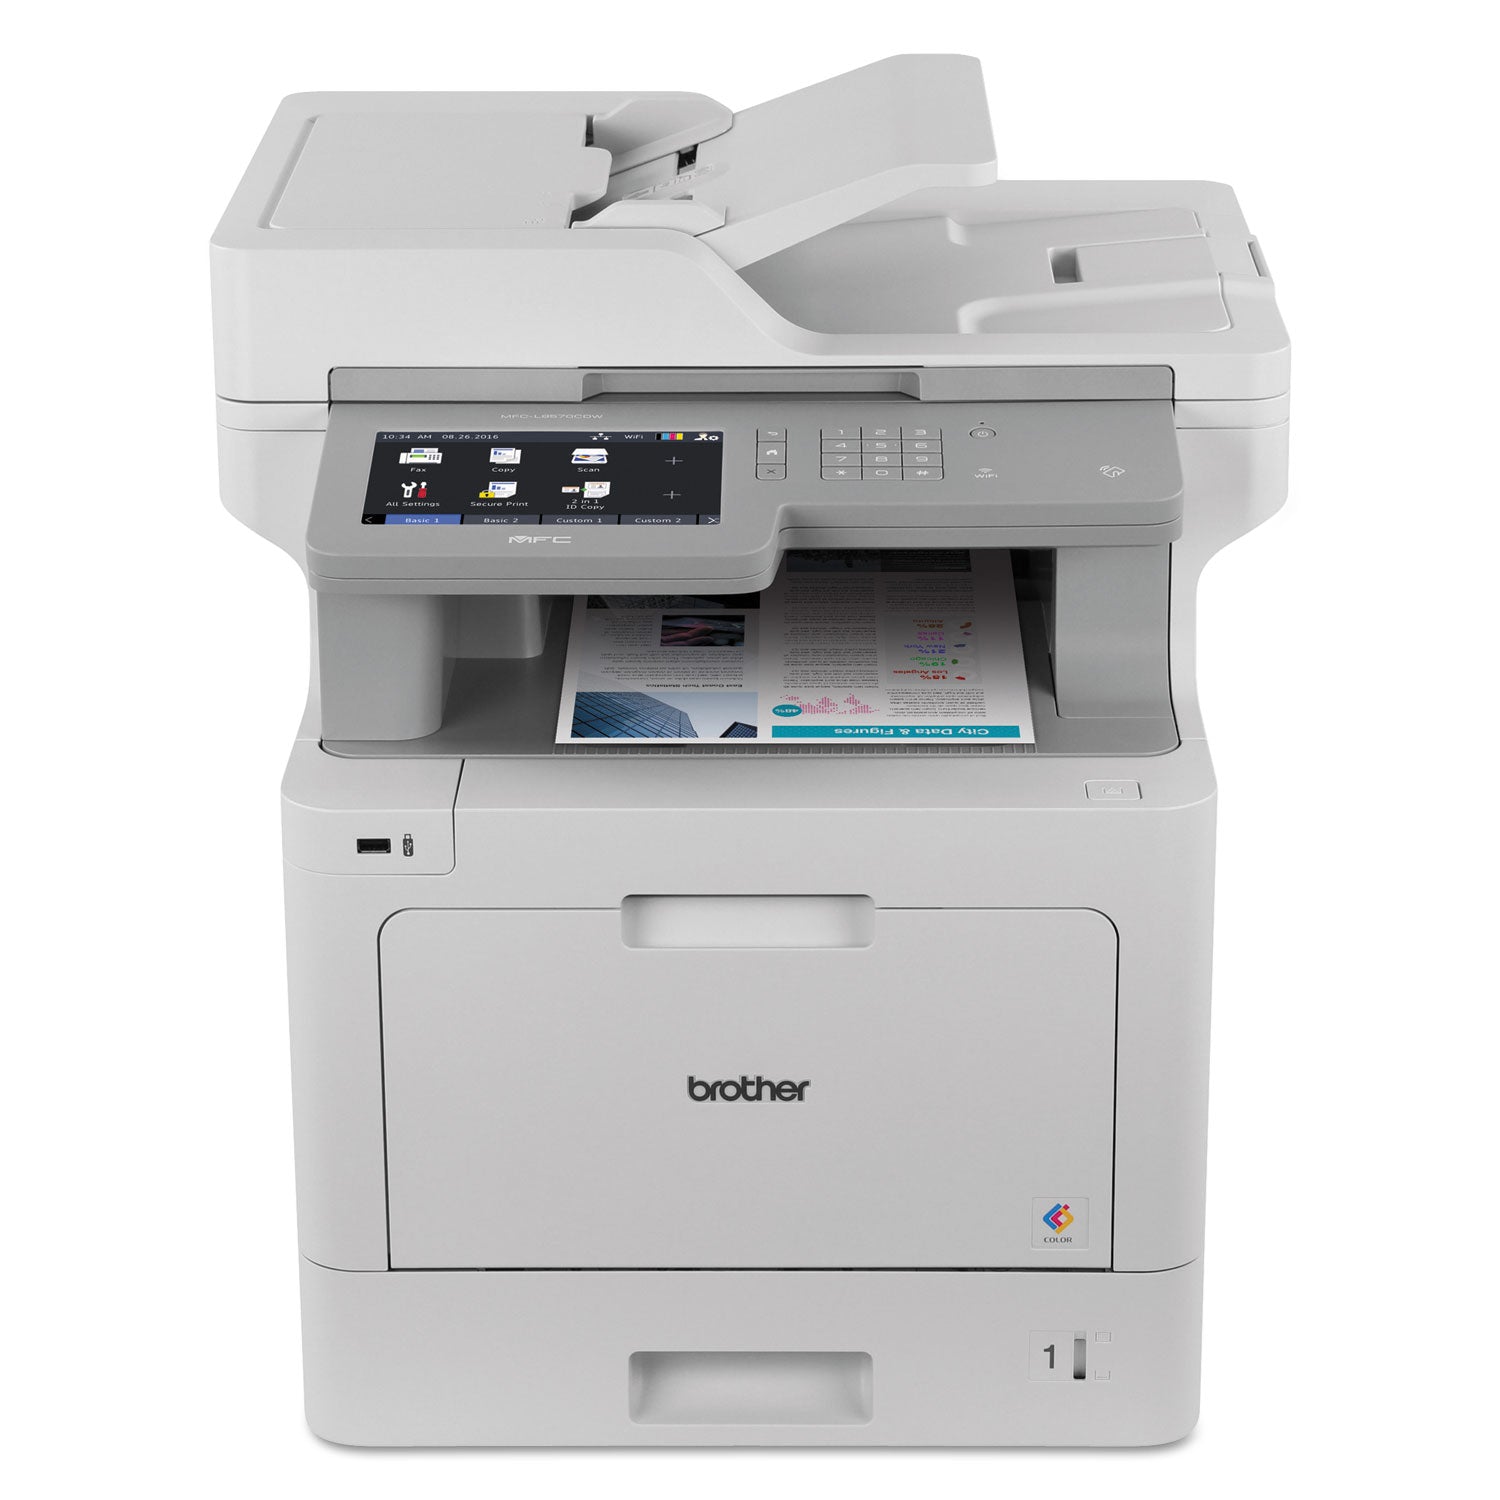 Brother Business Color Laser All-in-One MFC-L9570CDW - Duplex Printing - Wireless LAN - Copier/Fax/Printer/Scanner - 33 ppm Mono/33 ppm Color - 2400 x 600 dpi Print - 7" LCD Touchscreen - Gigabit Ethernet - USB 2.0 - 1